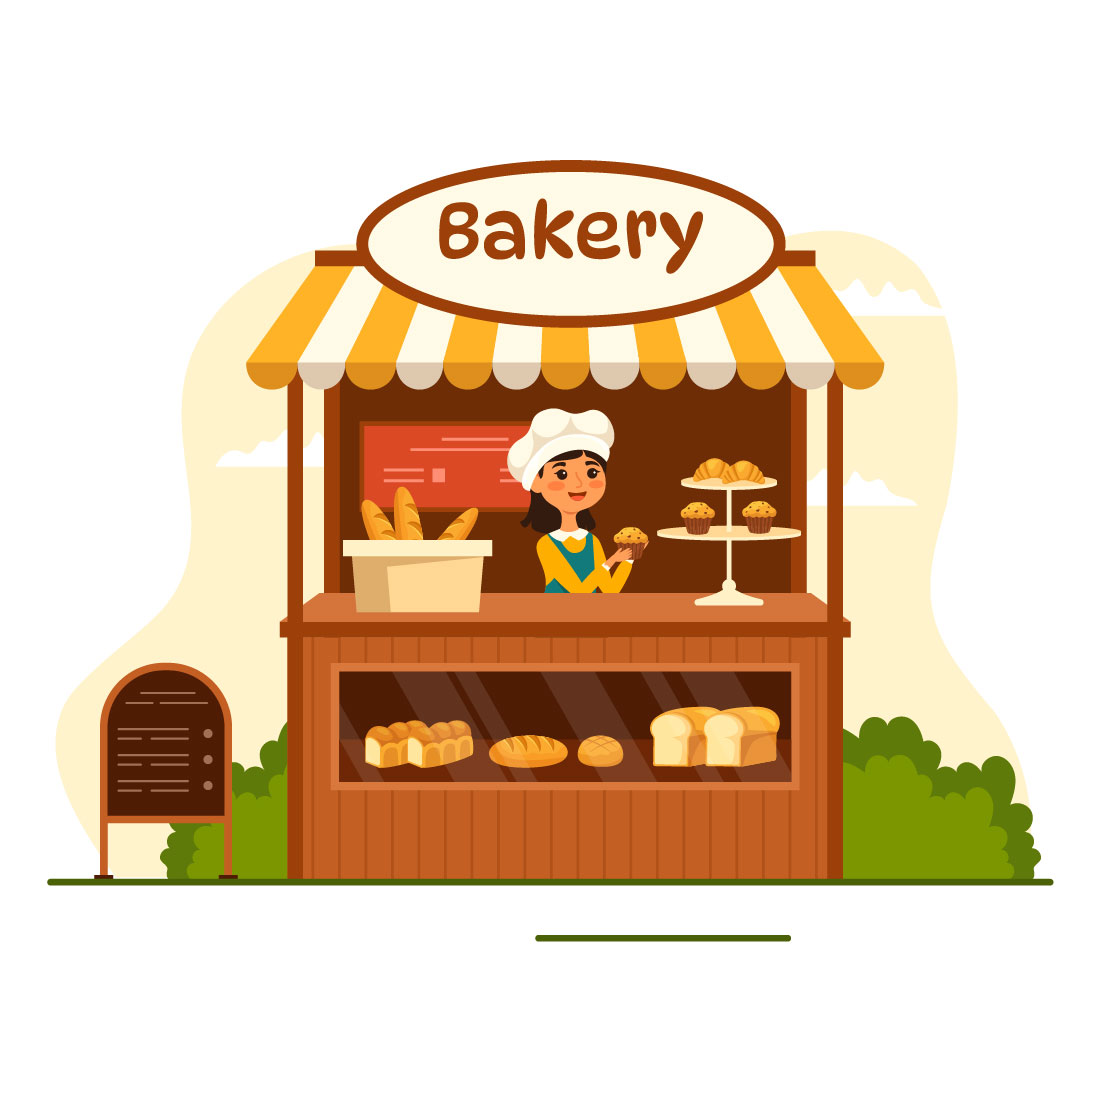 14 Bakery Store Illustration cover image.